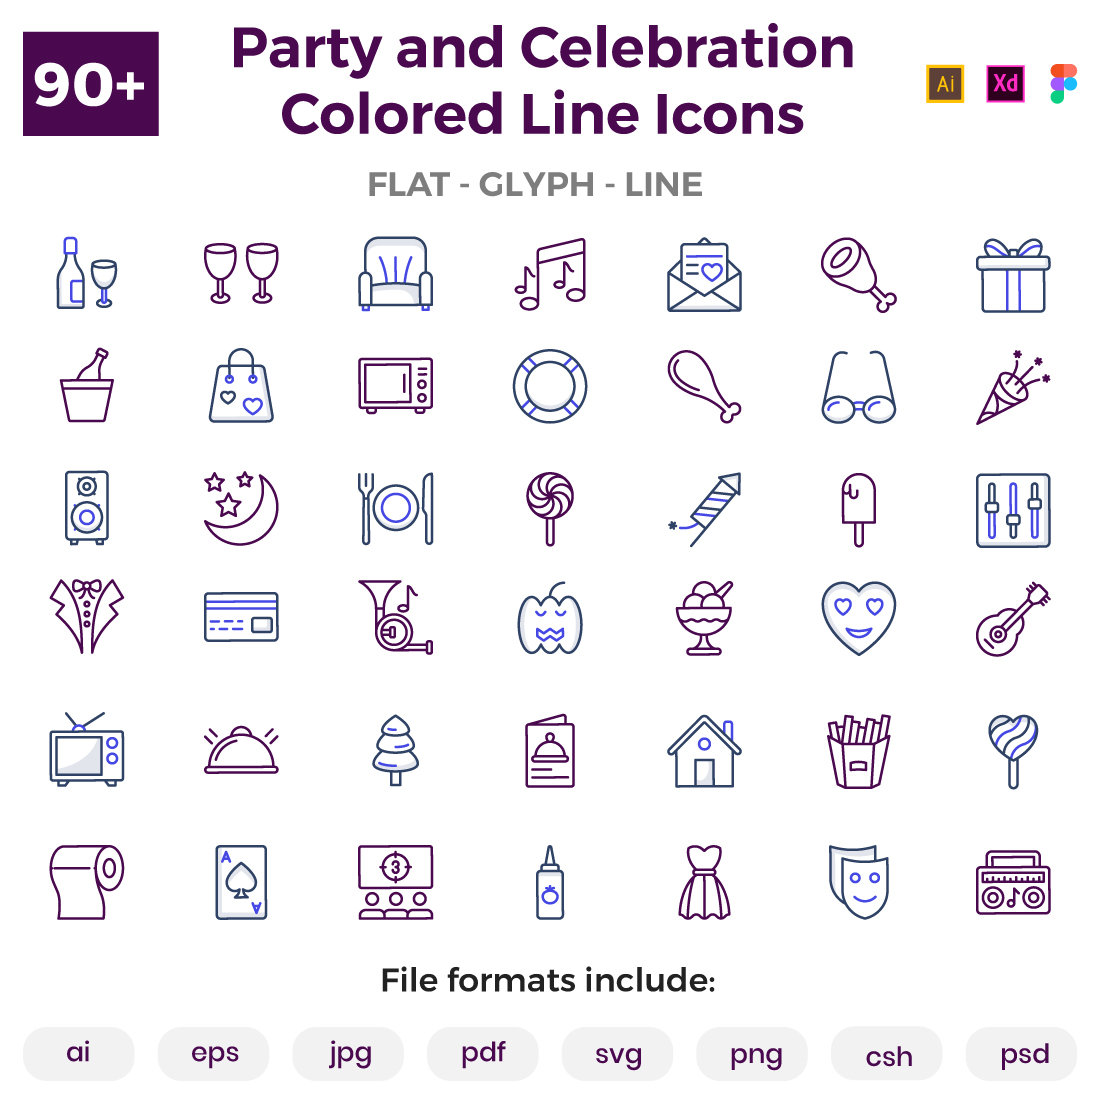 90+ Party and Celebration Colored Line Icons cover image.